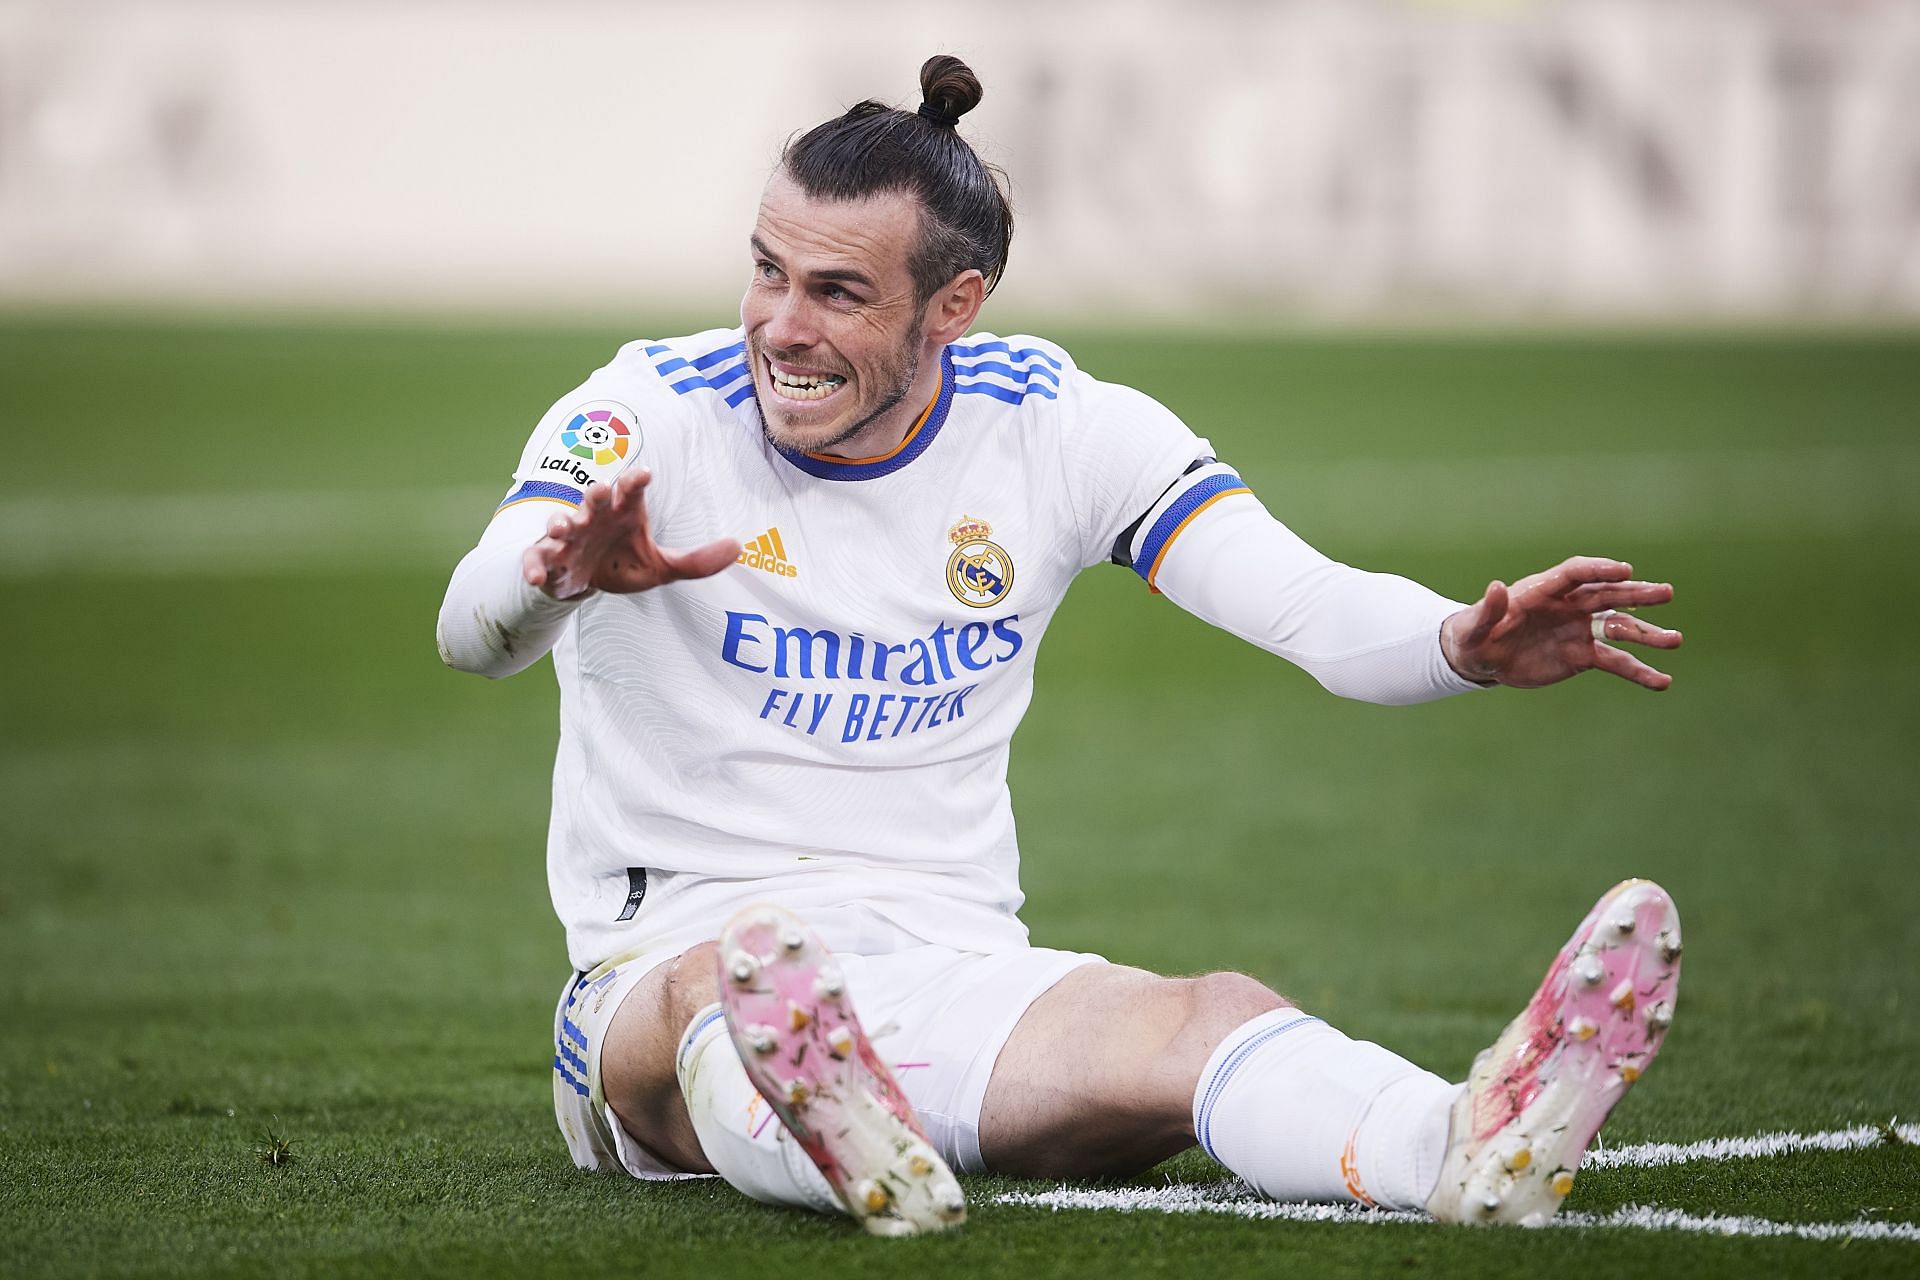 Carlo Ancelotti refused to confirm if Gareth Bale would be in the starting eleven against PSG.